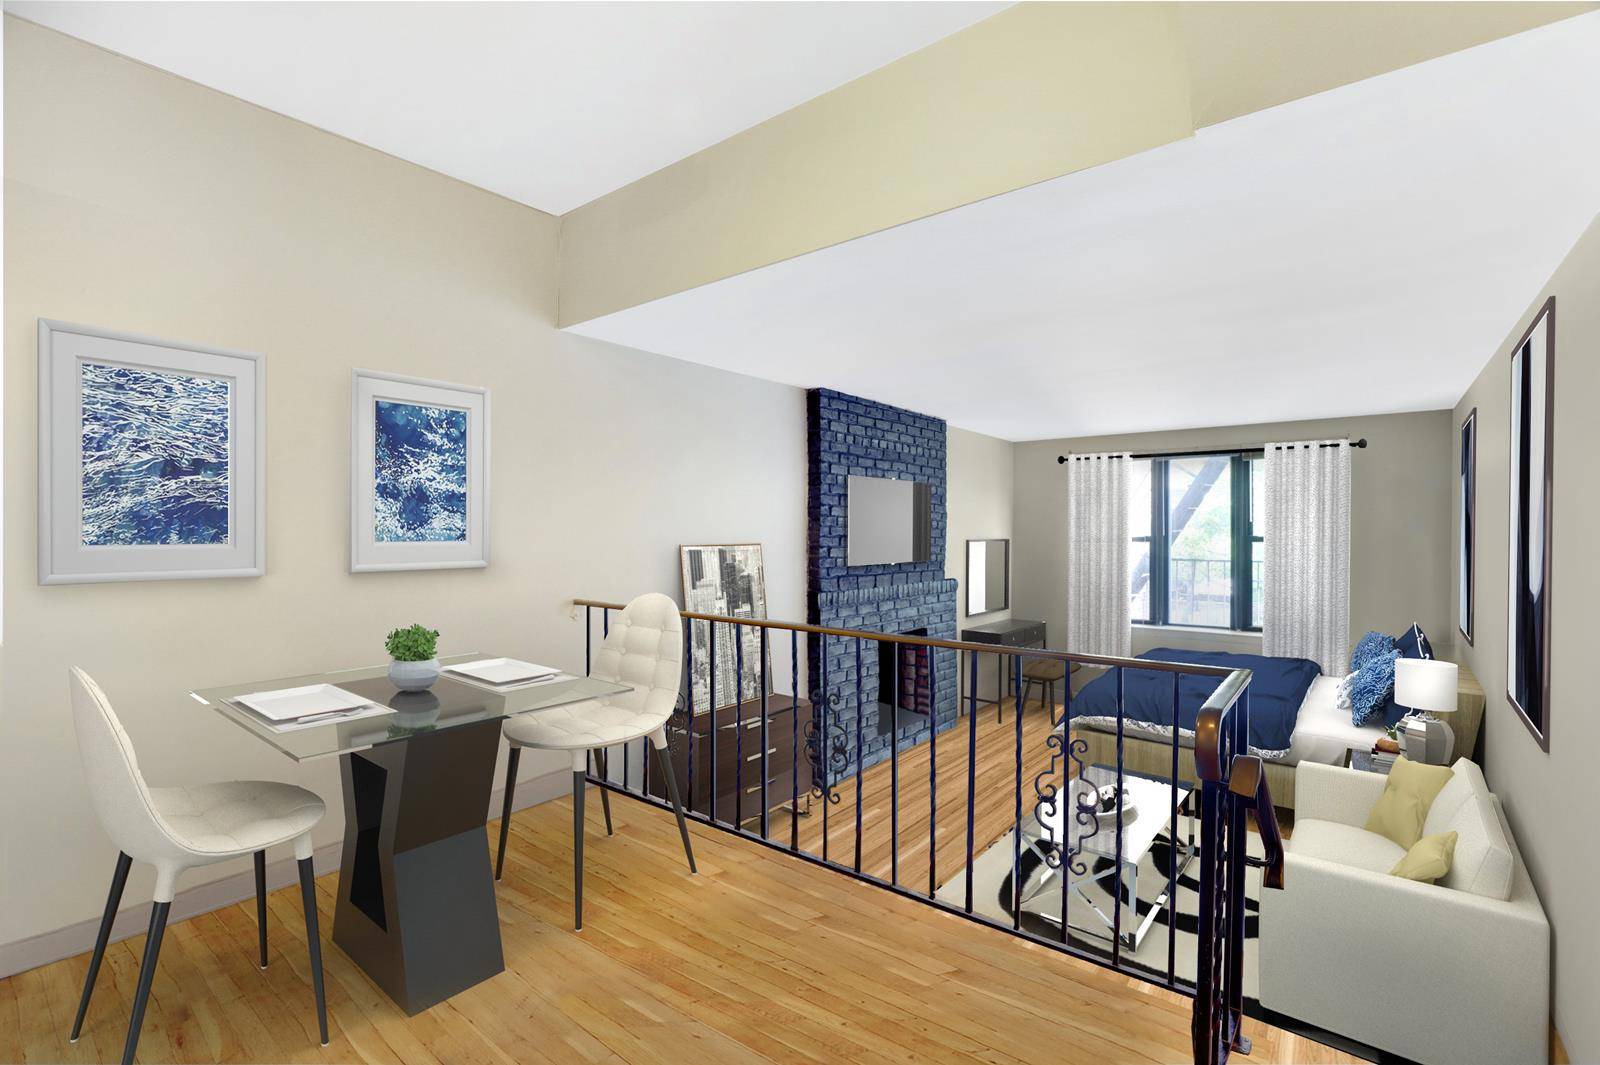 Available July 1st, this incredible Bi Level studio gives you the space of an uptown apartment, while still staying in the amazing neighborhood of Gramercy !